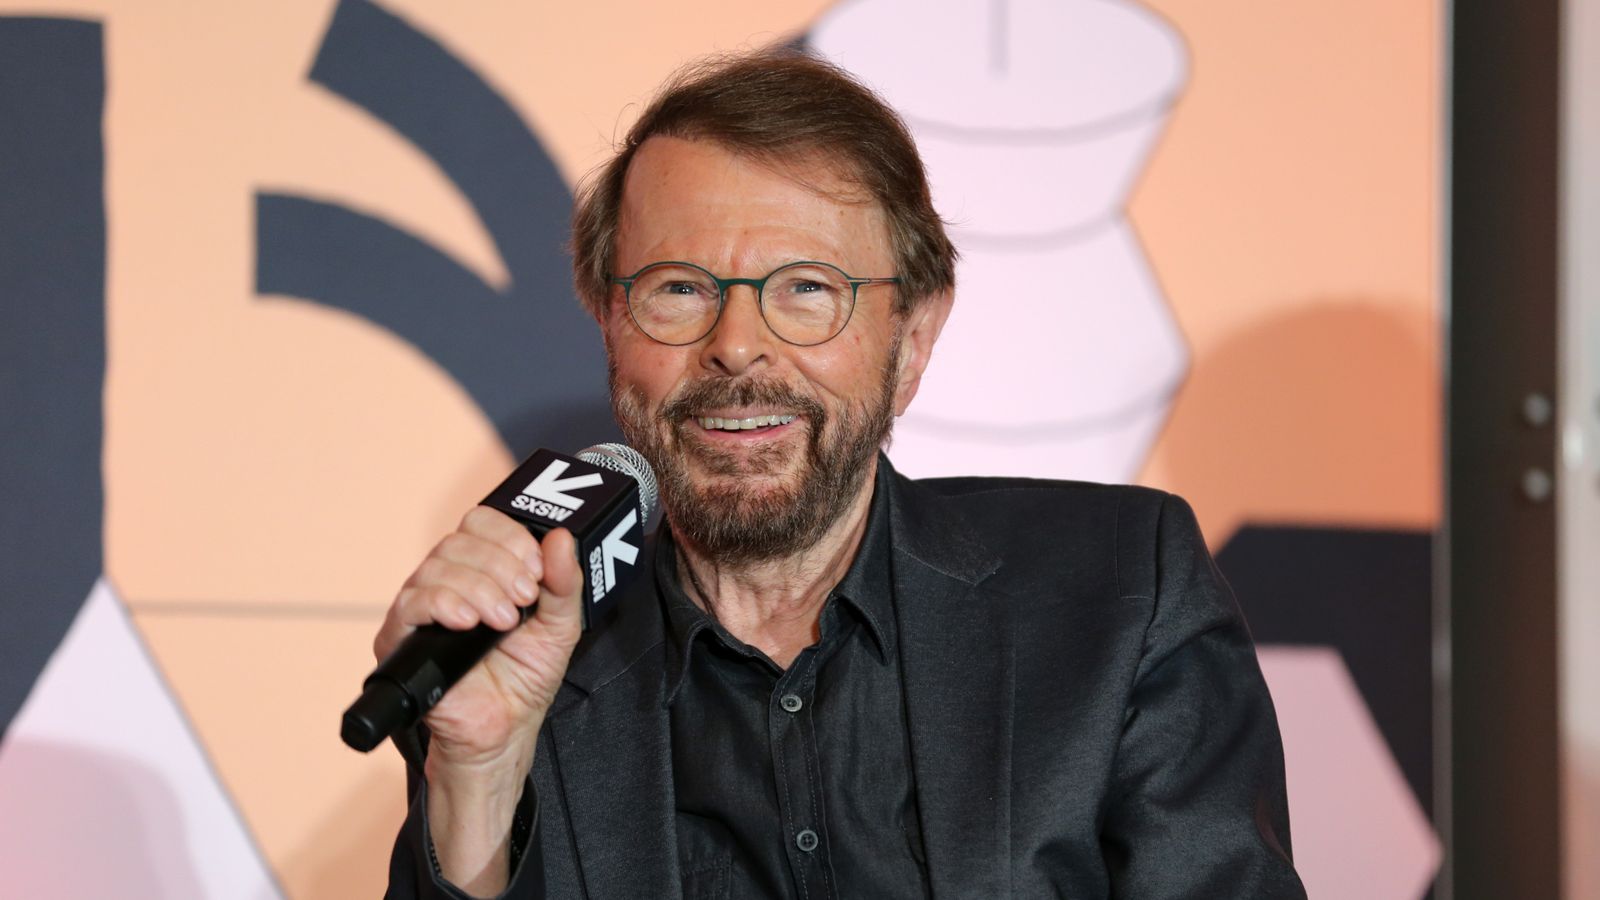 Bjorn Ulvaeus attends Featured Session: Creator Credits: Providing the Missing Links during the 2019 SXSW Conference and Festivals at Hilton Austin on March 14, 2019 in Austin, Texas.